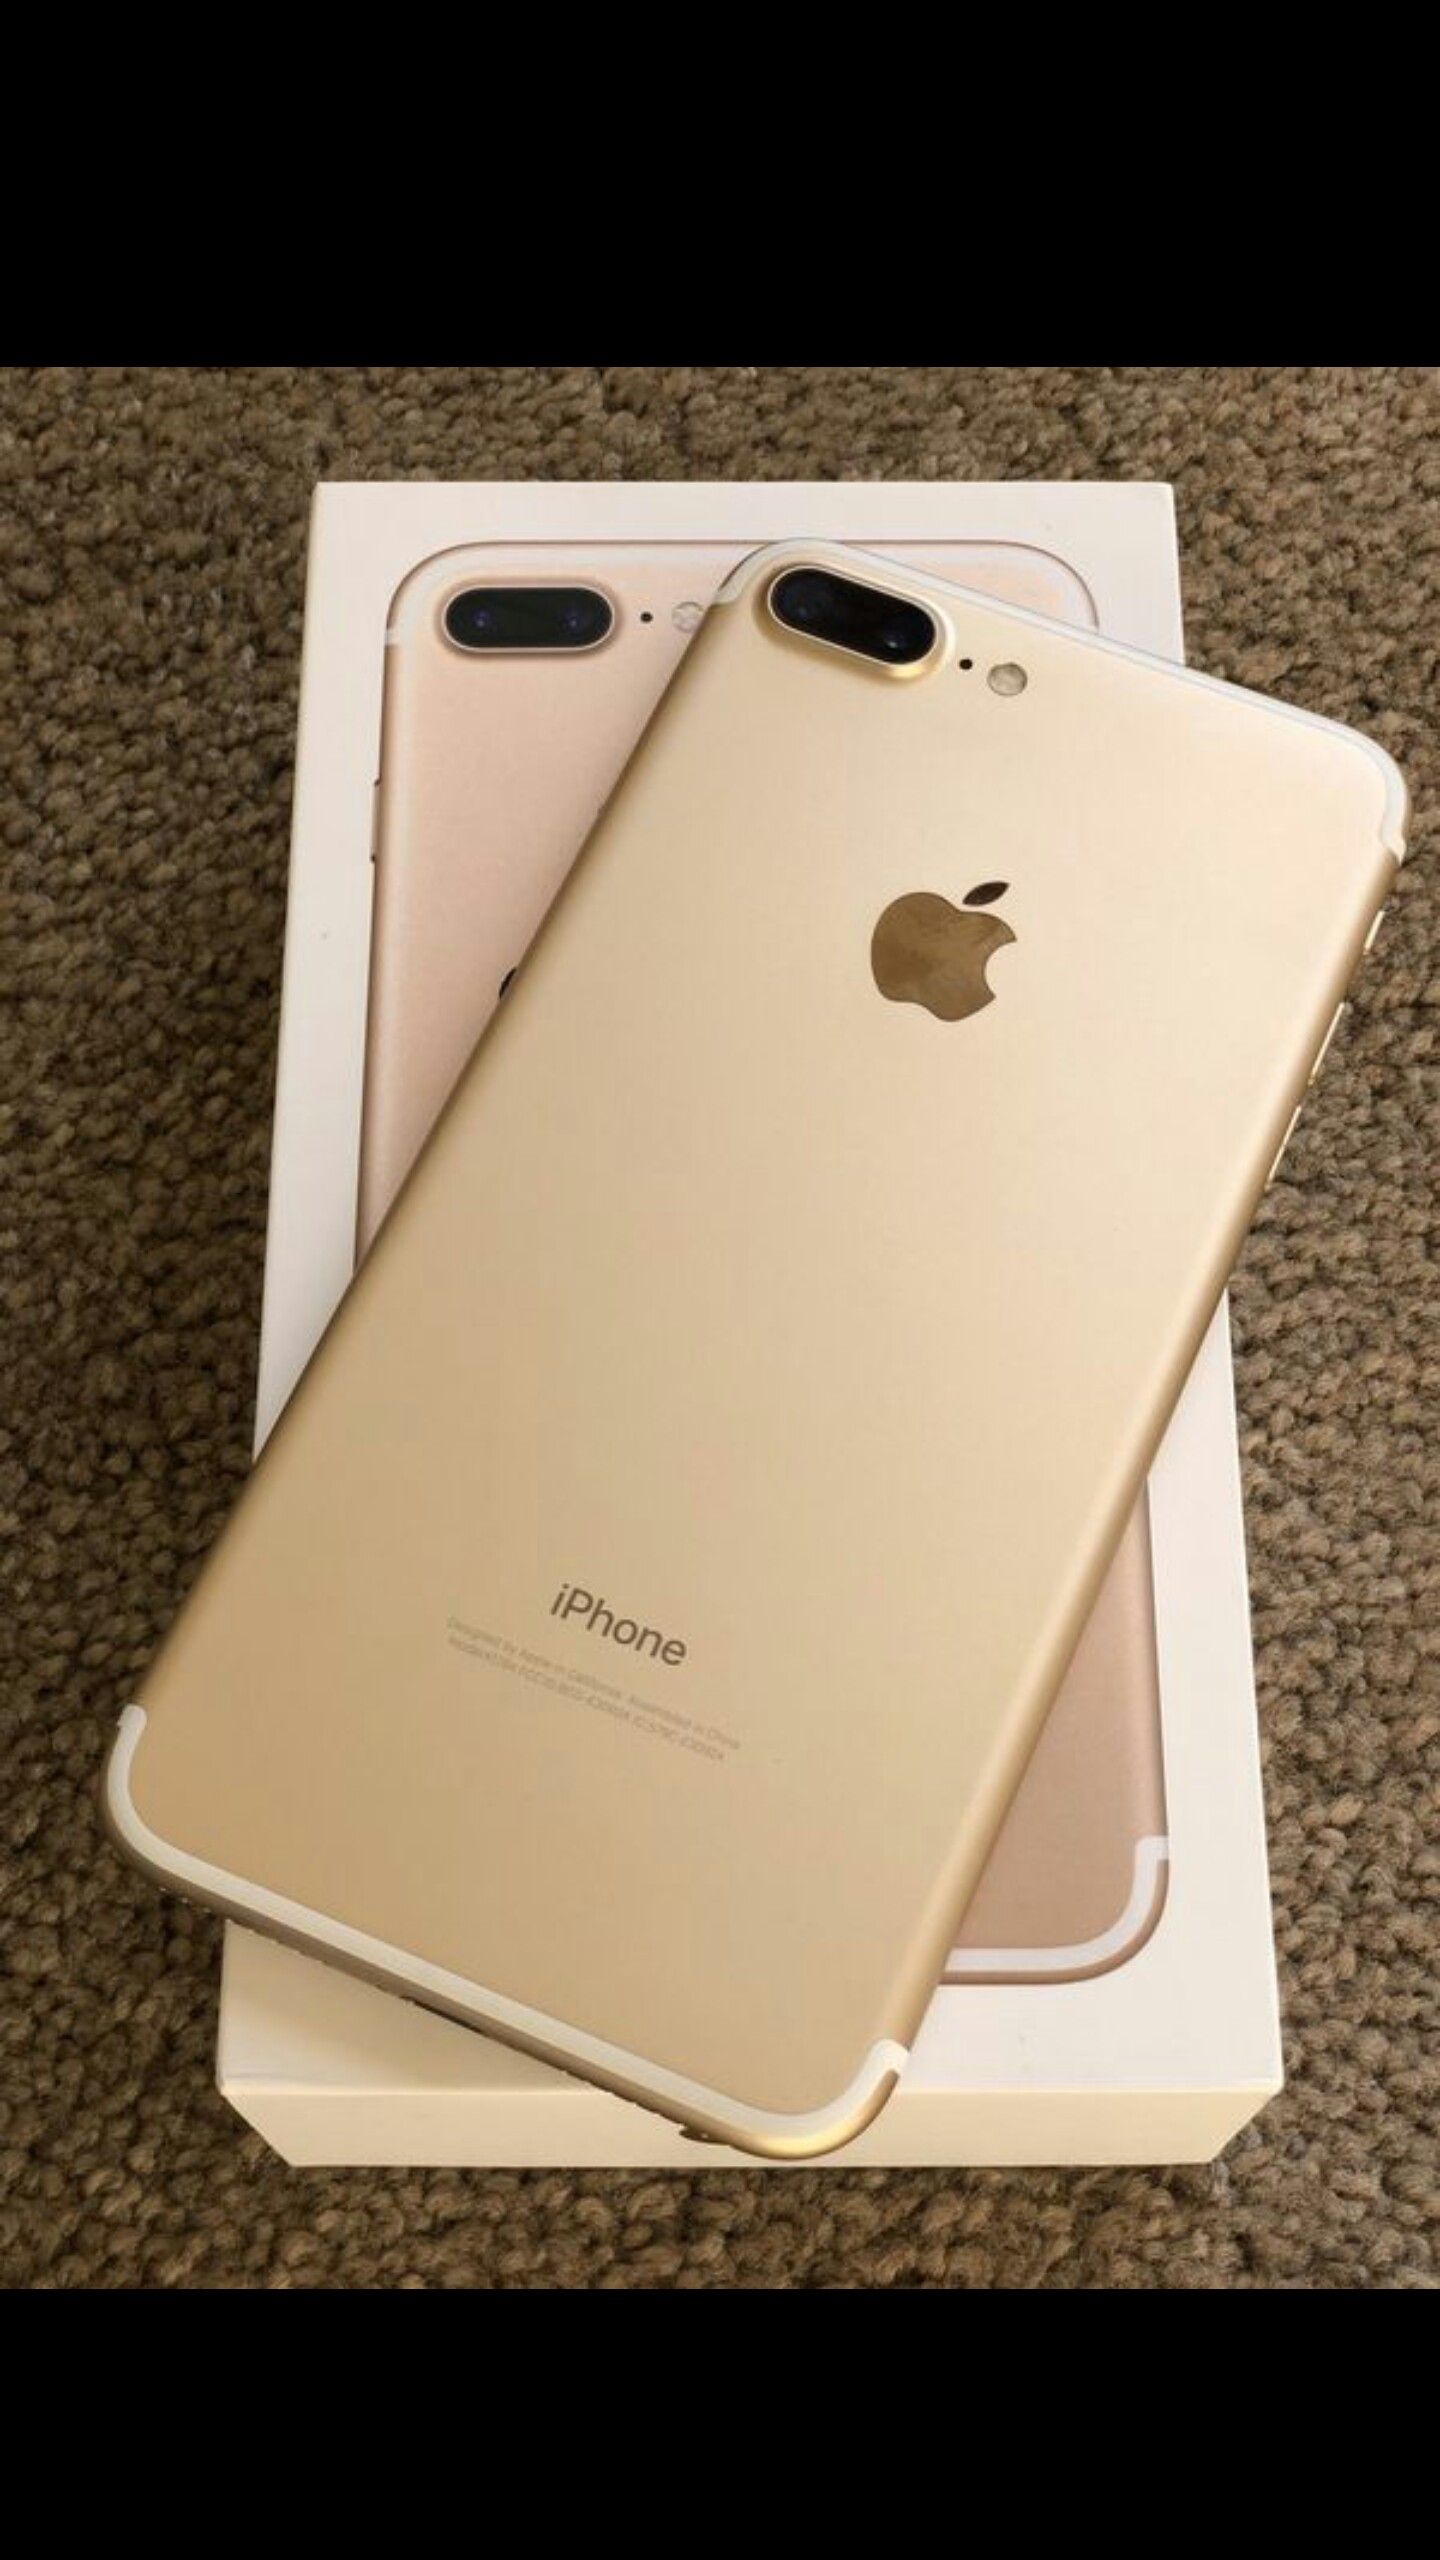 IPhone 7 Plus, 32Gb, Factory UNLOCKED//Excellent Condition// As like New..